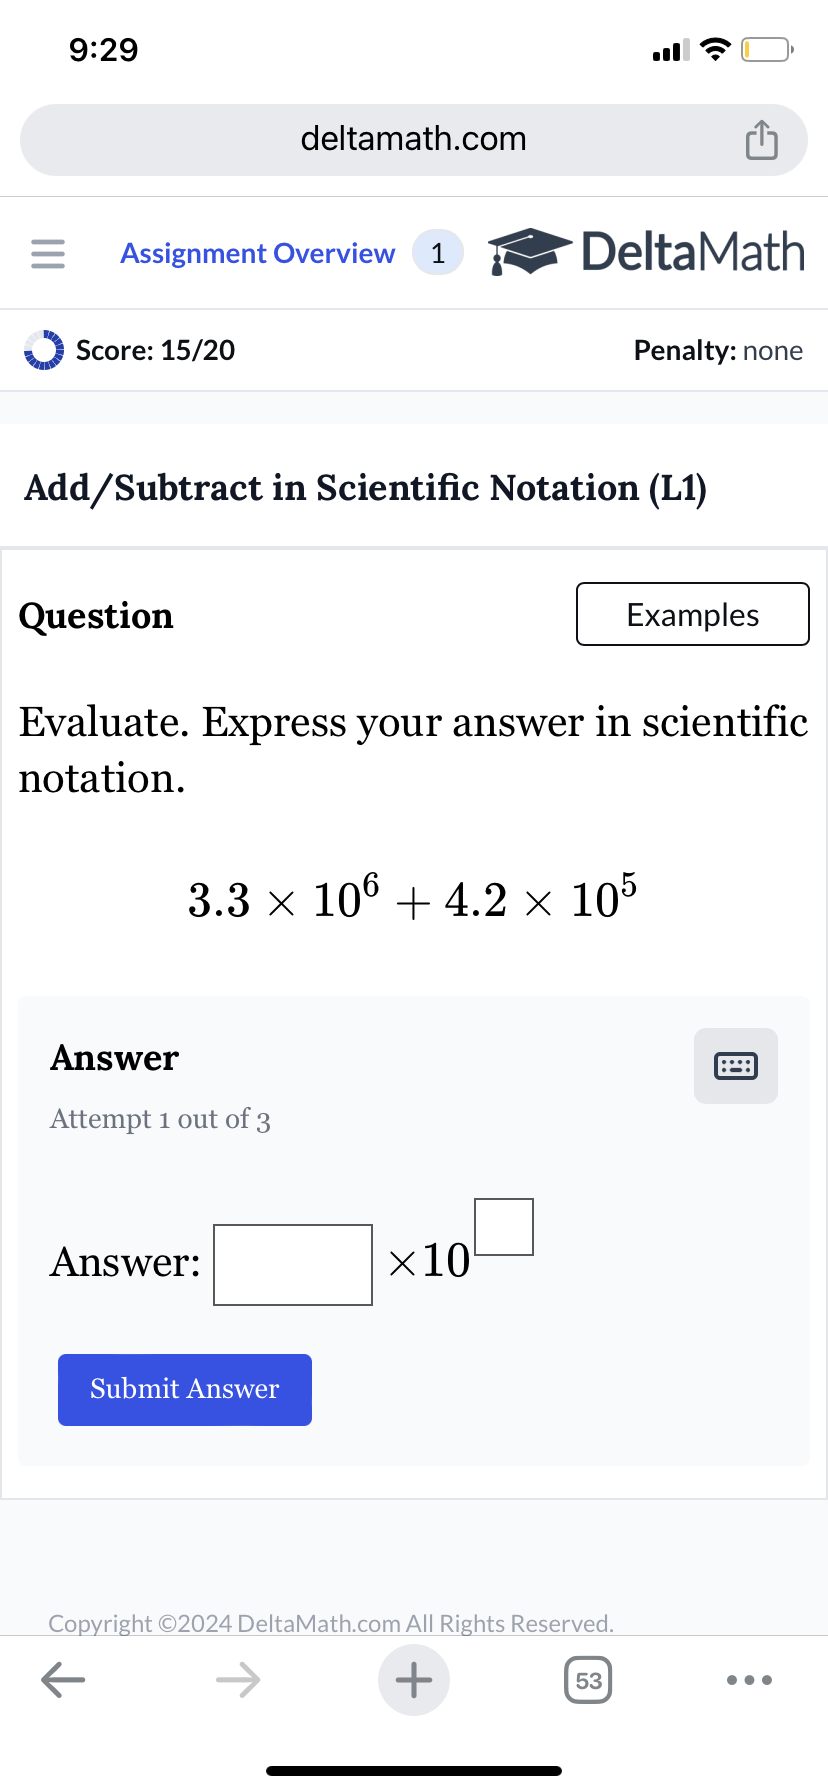 9:29
deltamath.com
= Assignment Overview 1
DeltaMath
Score: 15/20
Penalty: none
Add/Subtract in Scientific Notation (L1)
Question
Examples
Evaluate. Express your answer in scientific
notation.
3.3 × 106 + 4.2 × 105
Answer
Attempt 1 out of 3
Answer:
Submit Answer
×10
Copyright ©2024 DeltaMath.com All Rights Reserved.
←
+
53